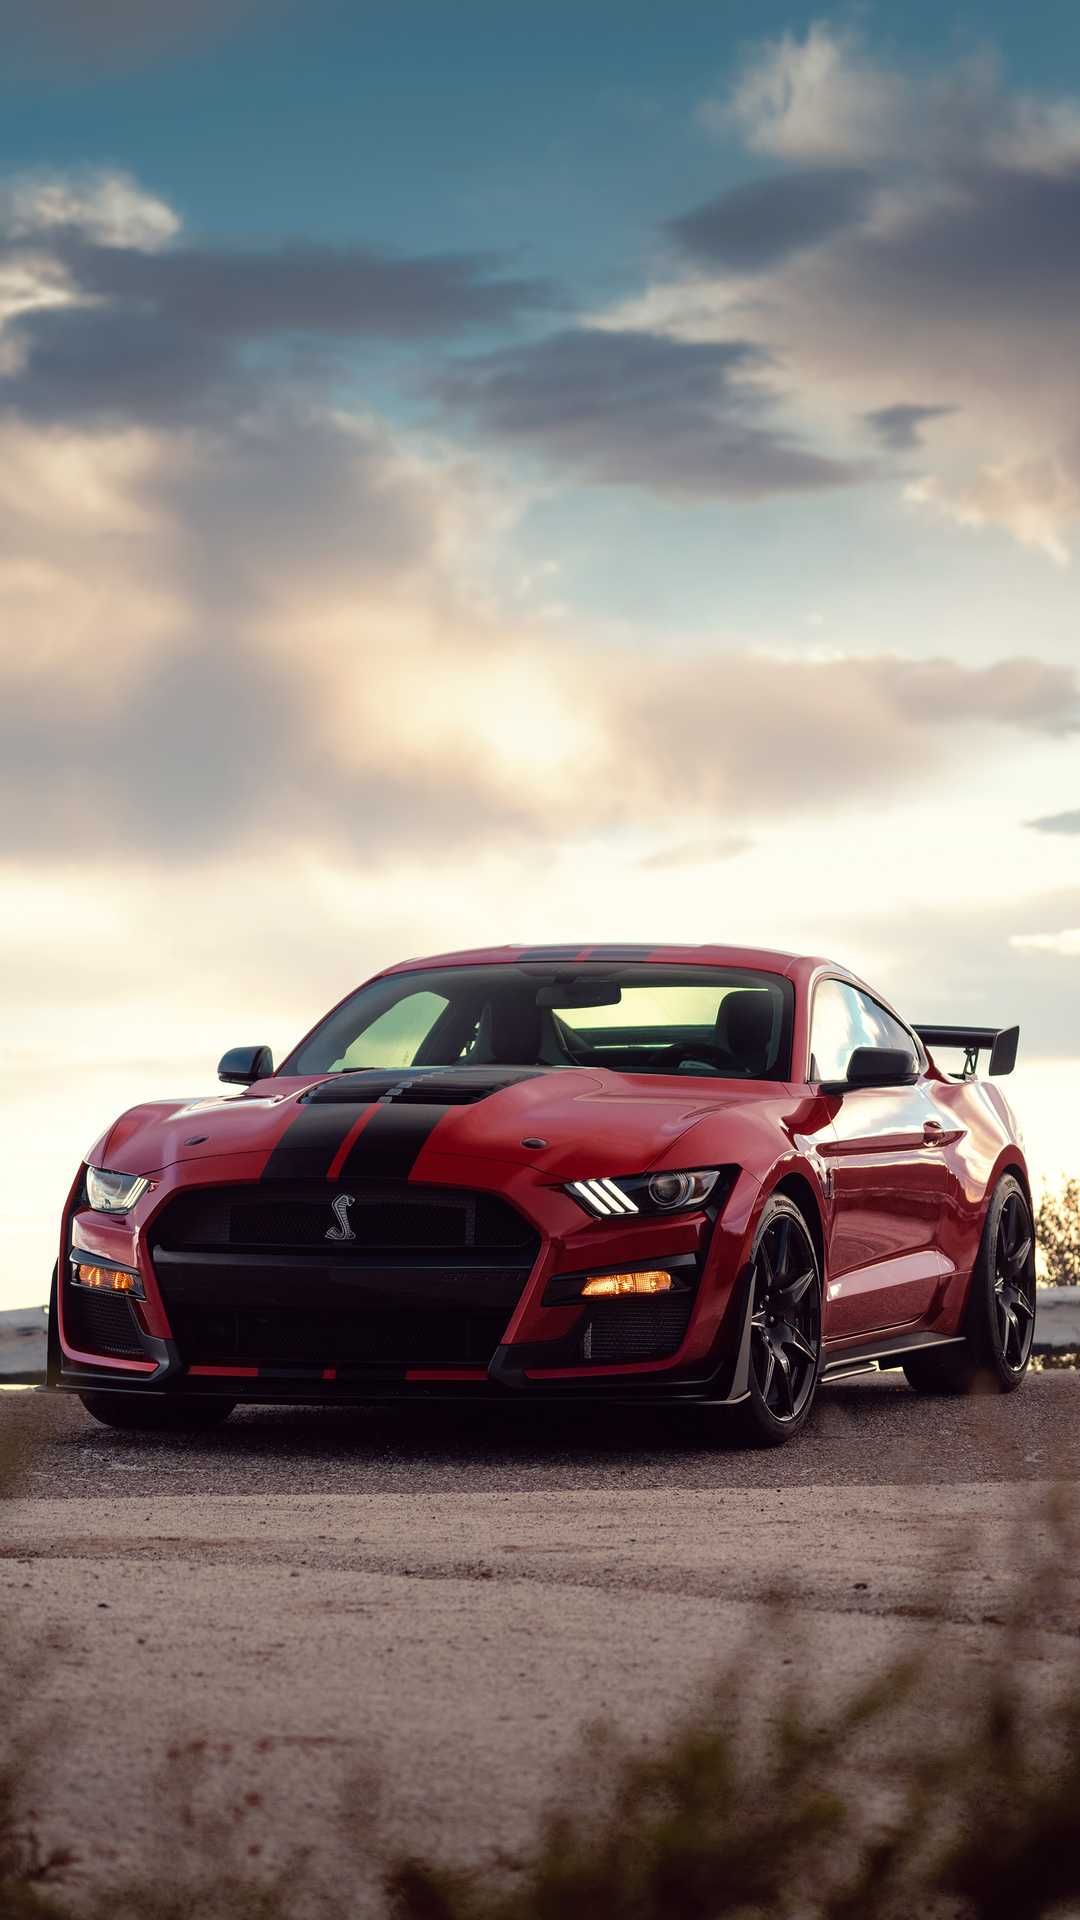 Mustang Shelby Gt500 iPhone Wallpapers - Wallpaper Cave